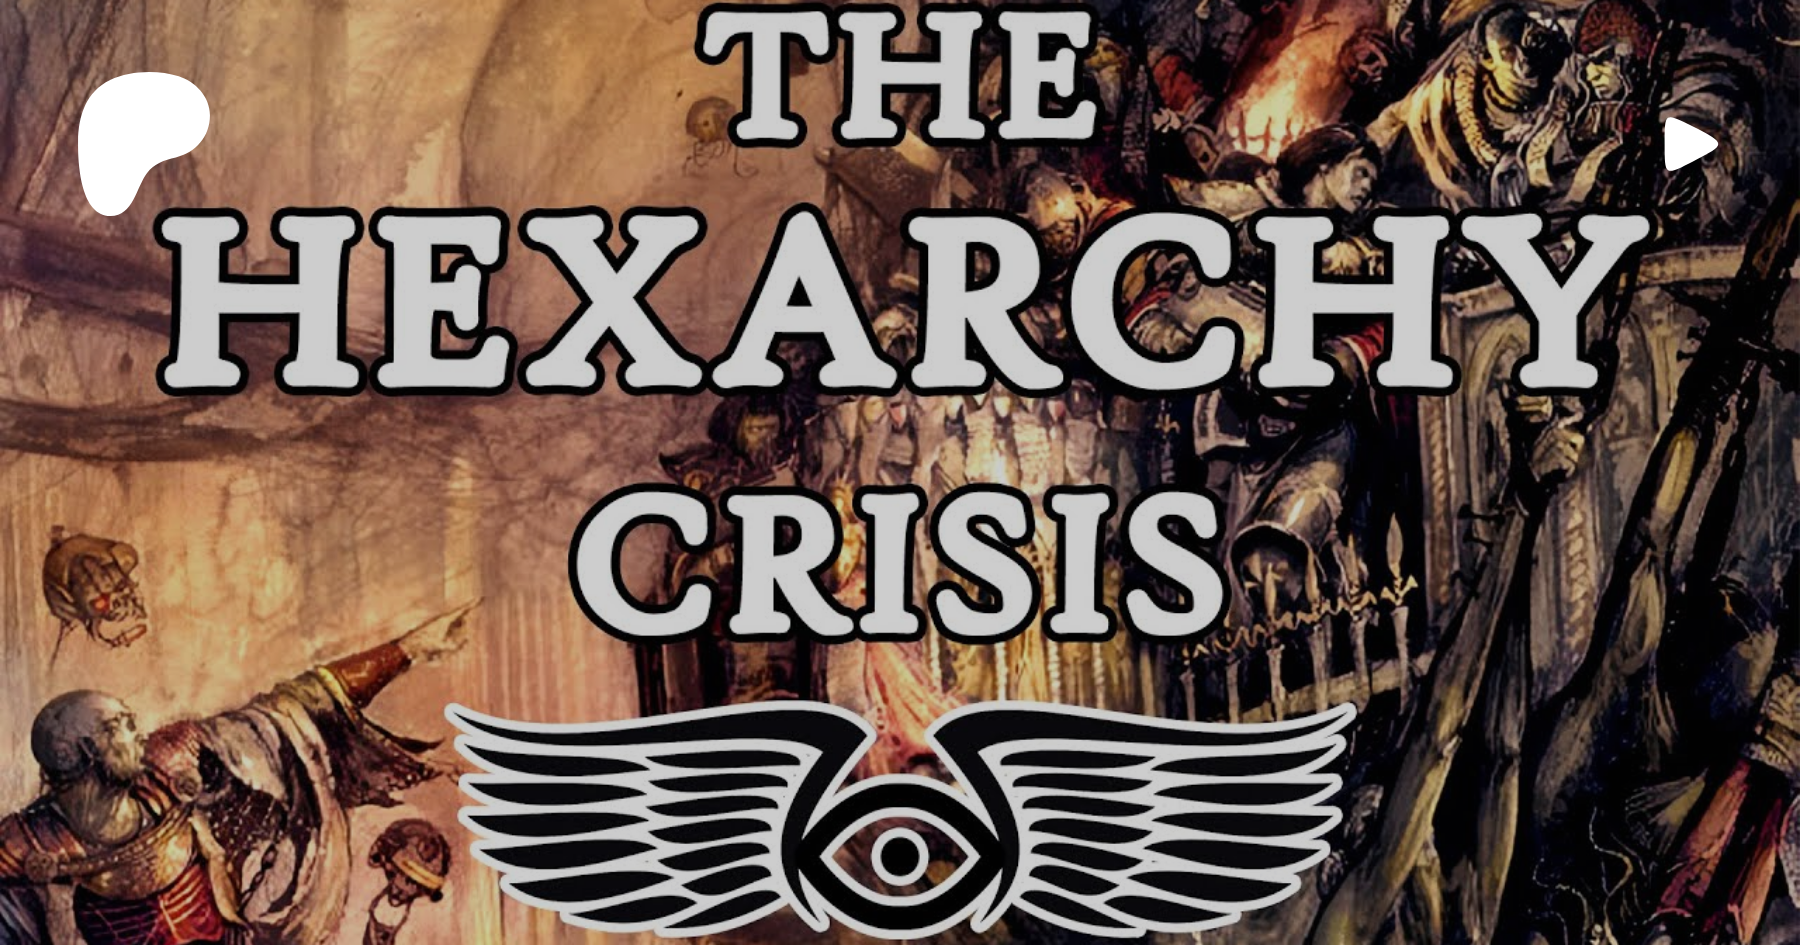 midnat Portico Brokke sig The Hexarchy Crisis | Oculus Imperia on Patreon